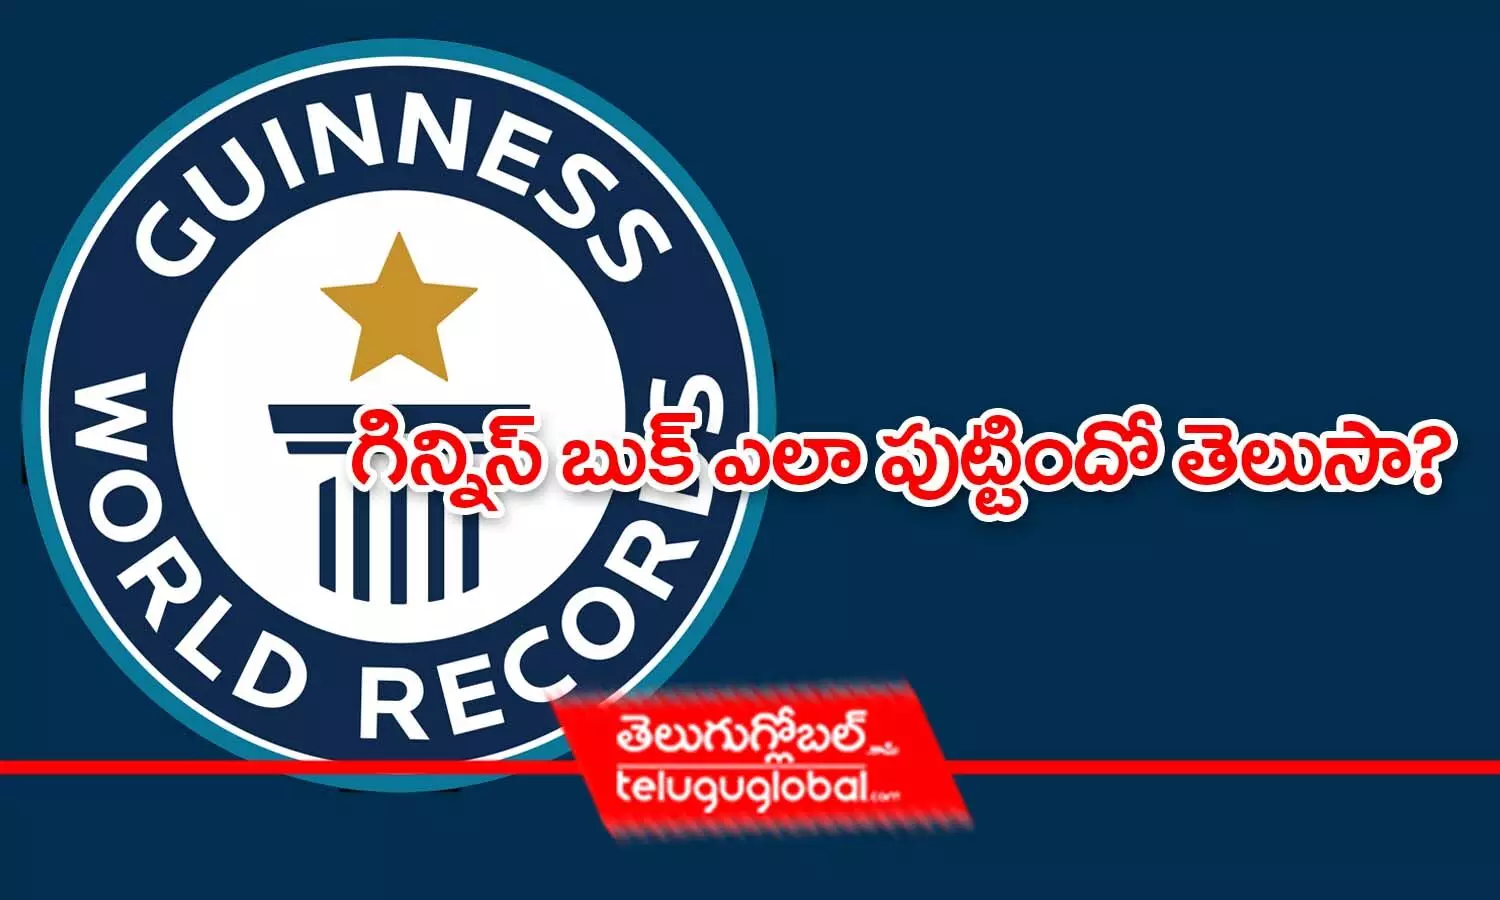 Do you know how the Guinness Book of World Records was born?